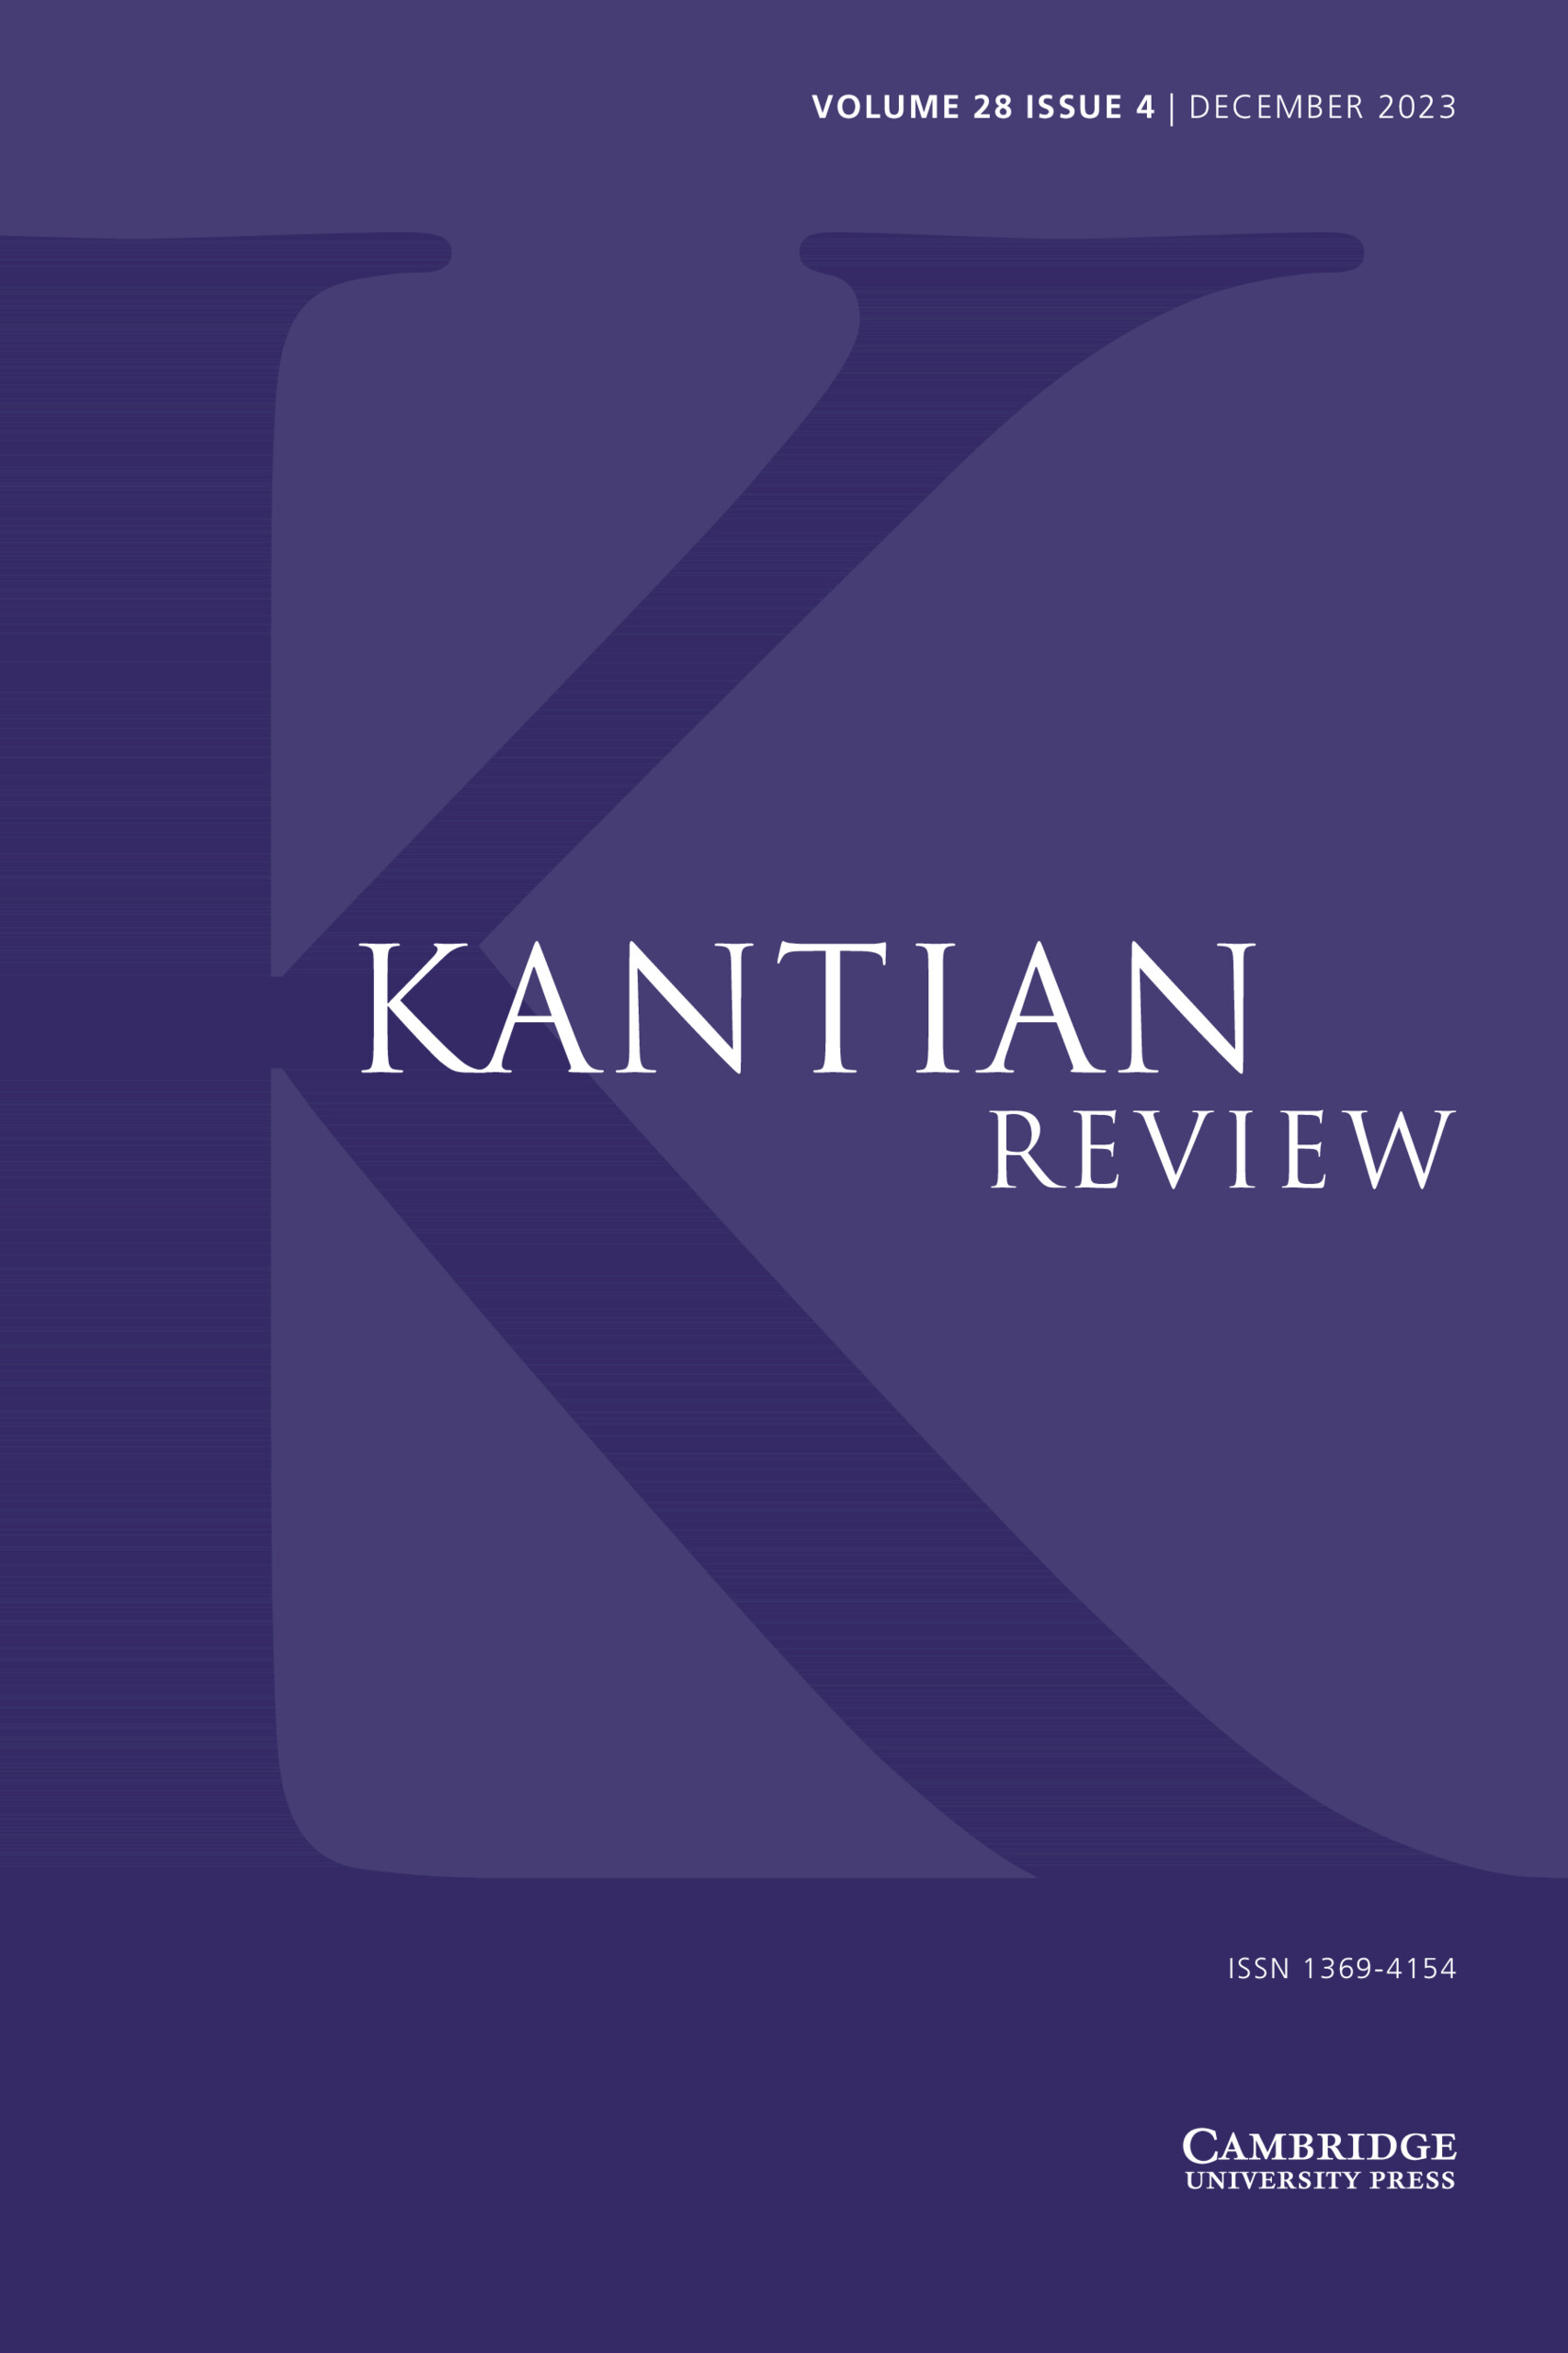 kantian ethics strengths and weaknesses